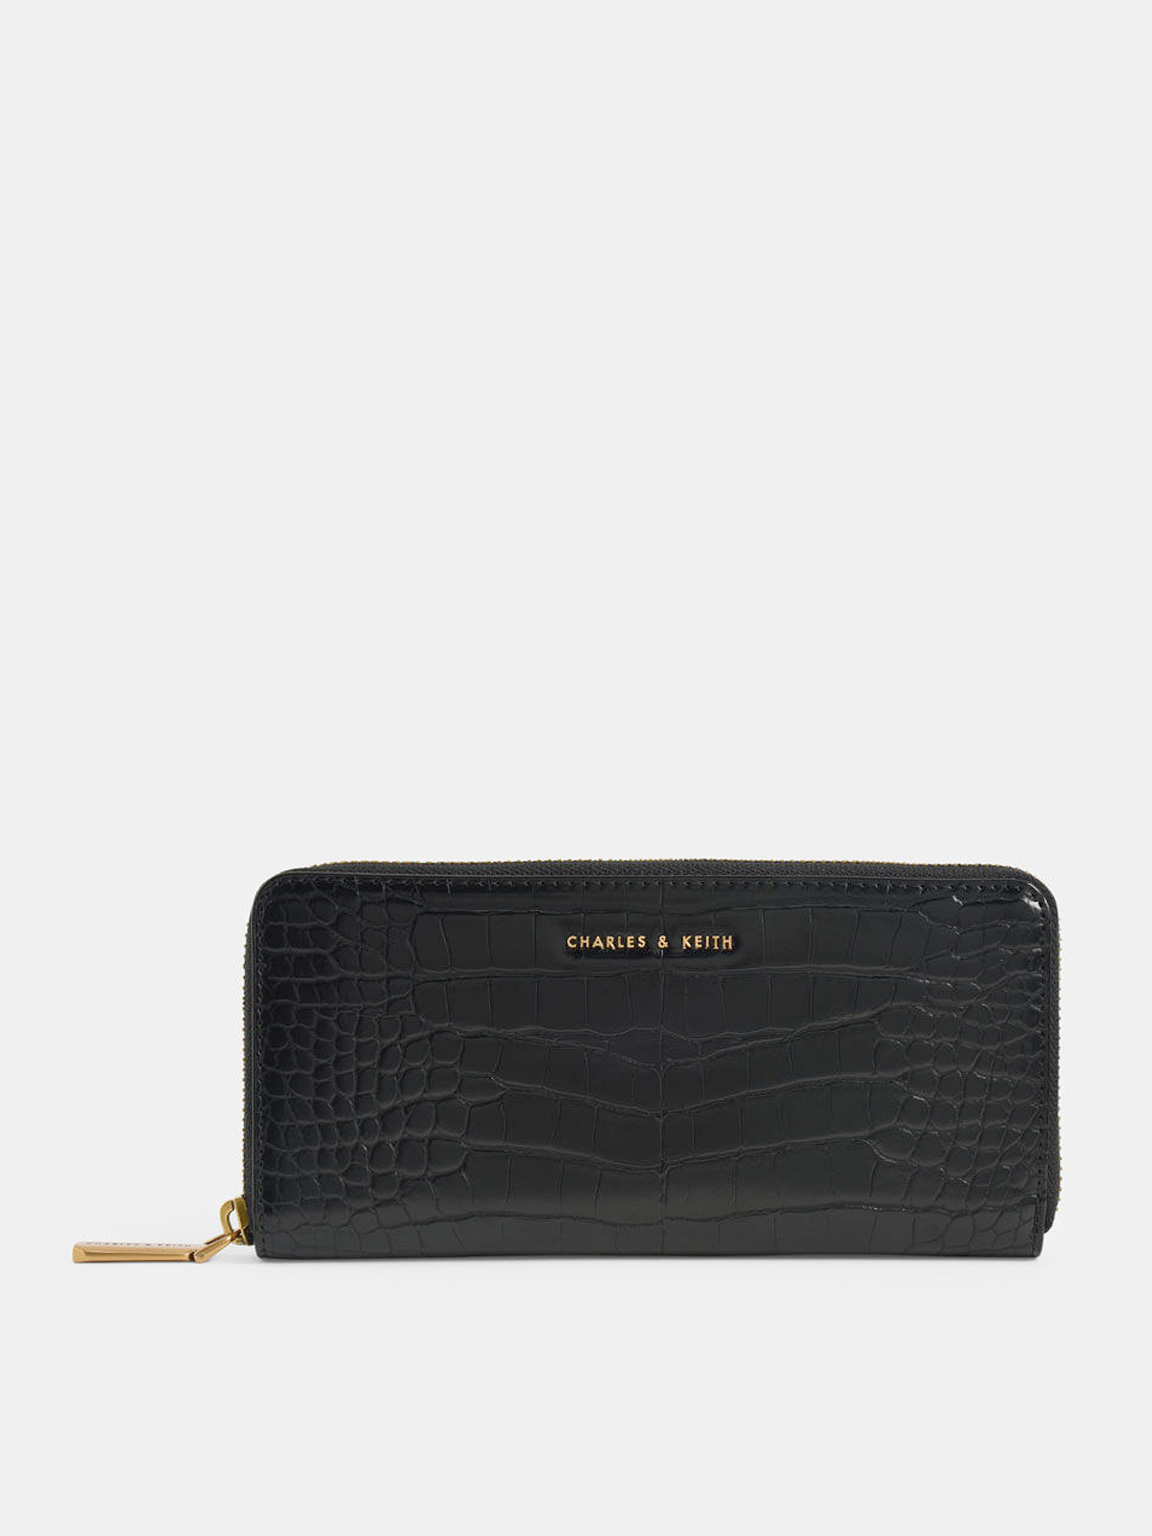 Charles & Keith Women's Croc-effect Long Wallet